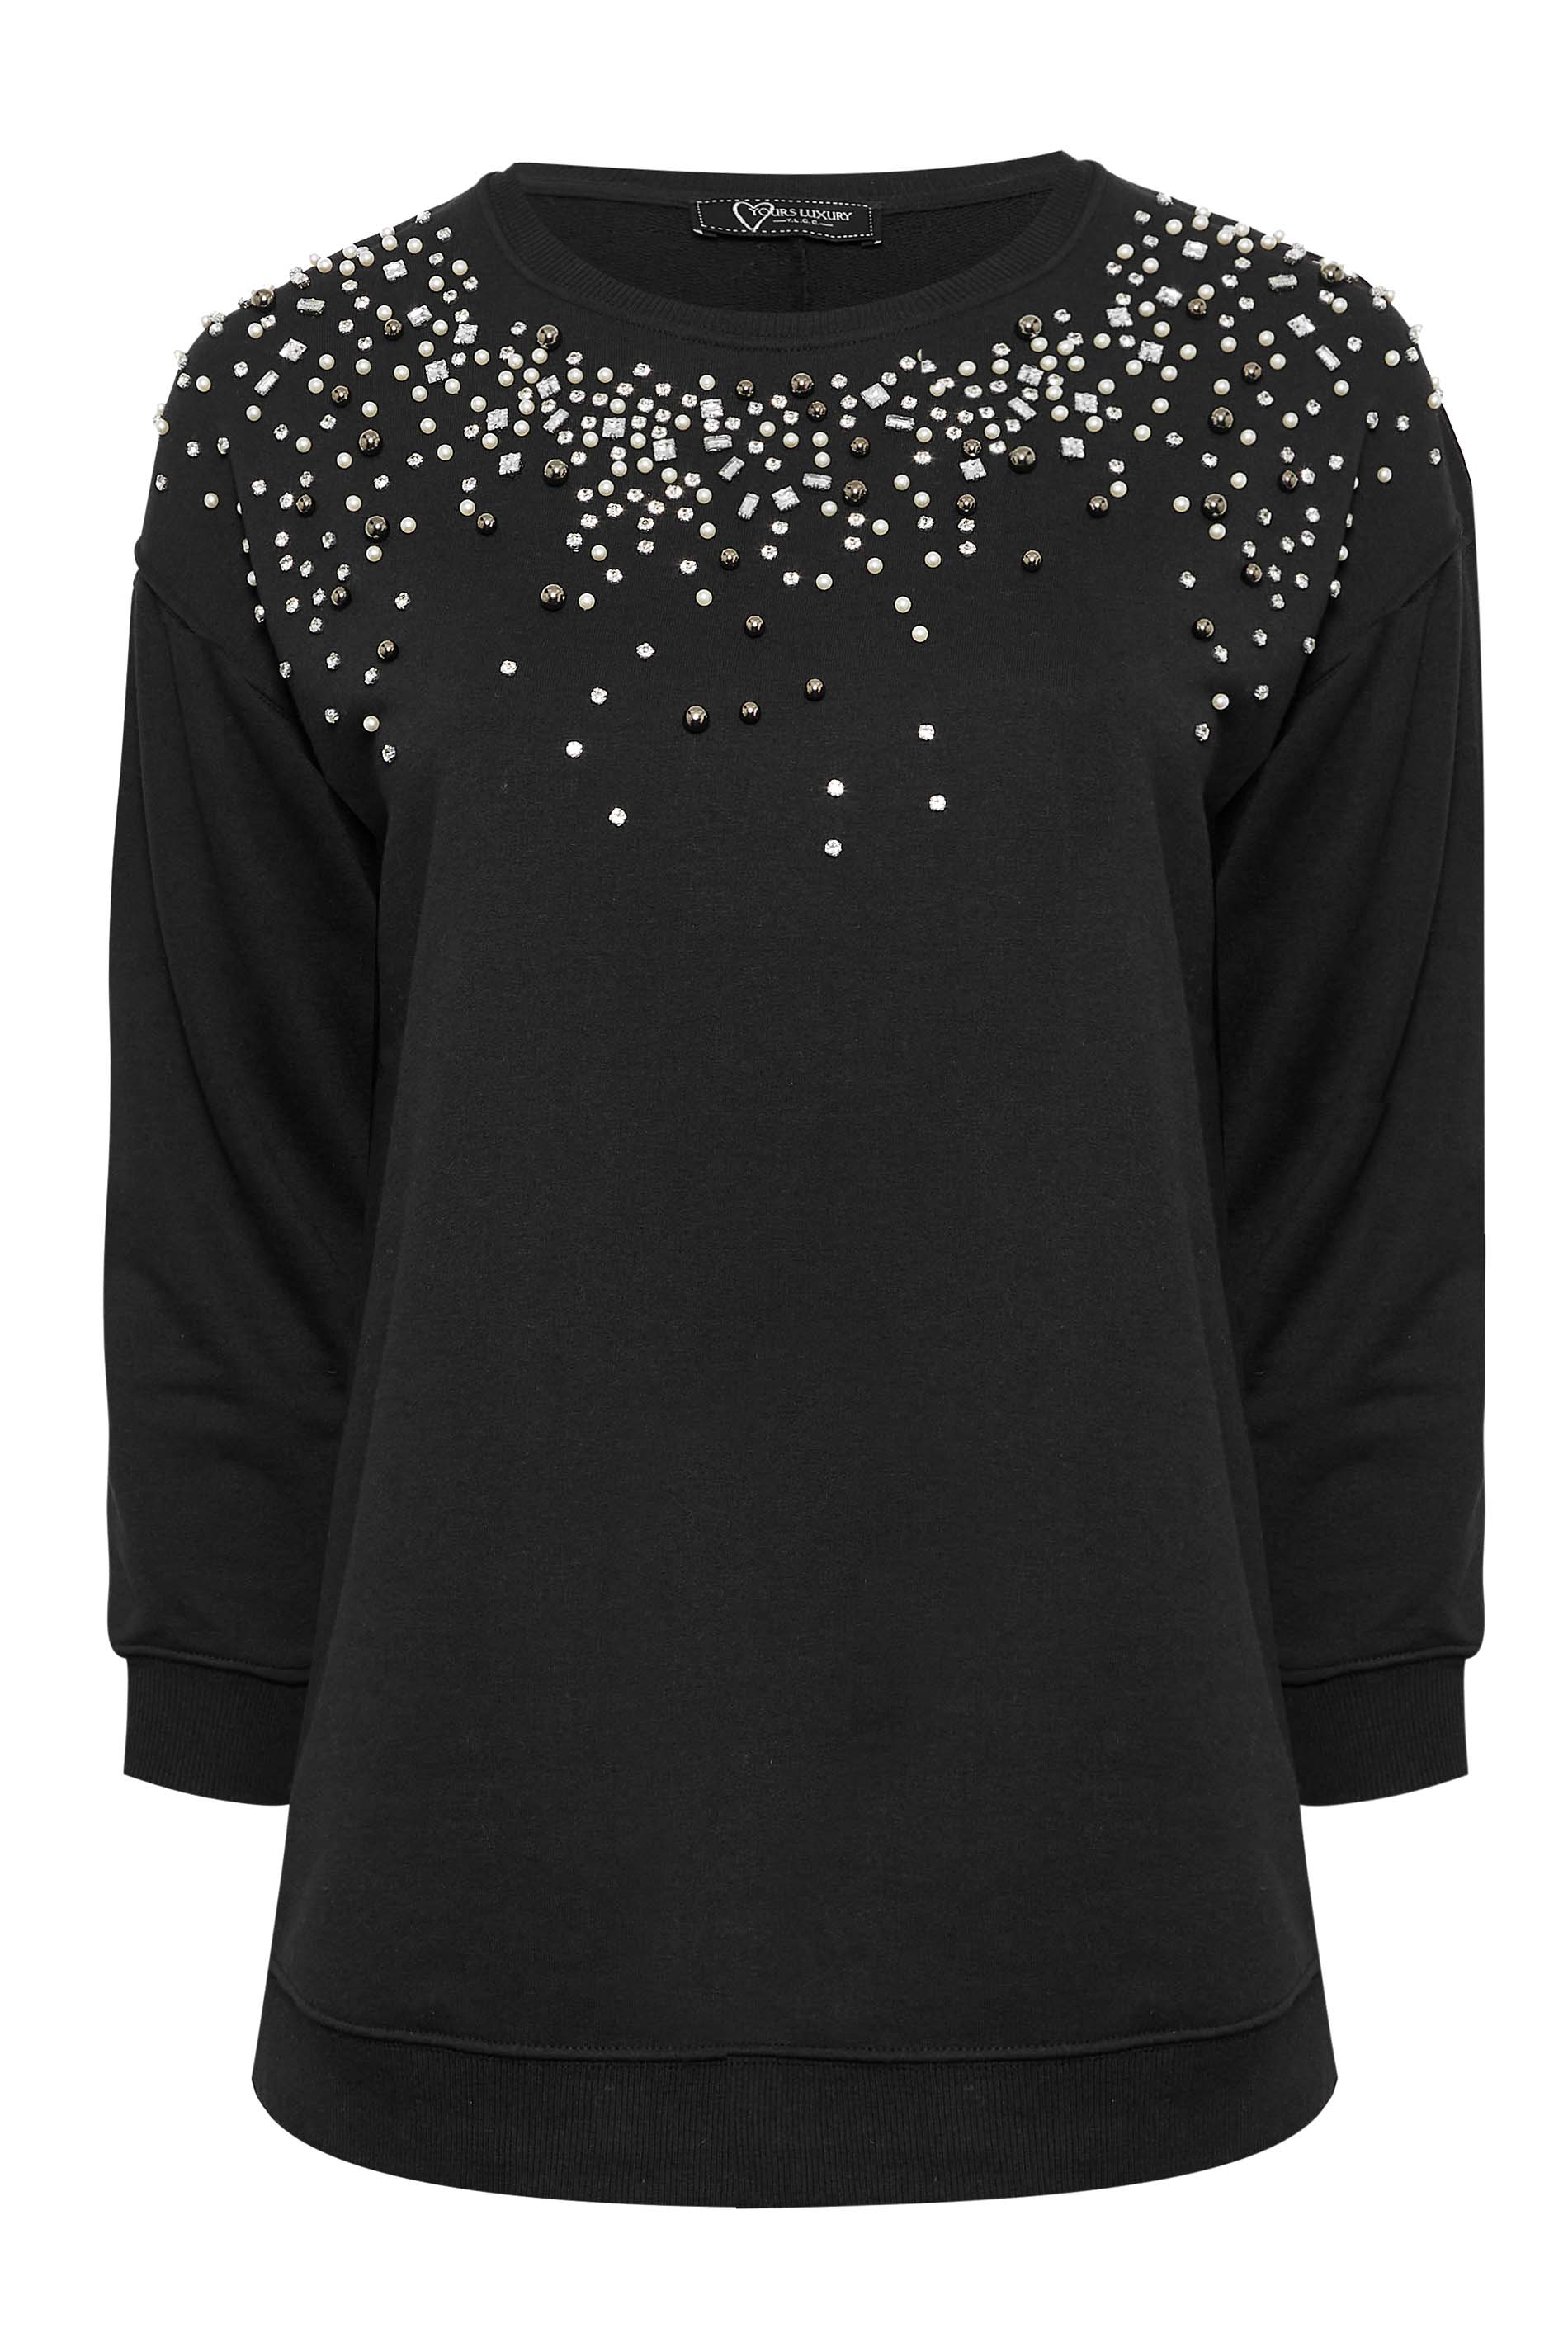 YOURS LUXURY Curve Black Diamante & Pearl Embellished Soft Touch Sweatshirt | Yours Clothing 2